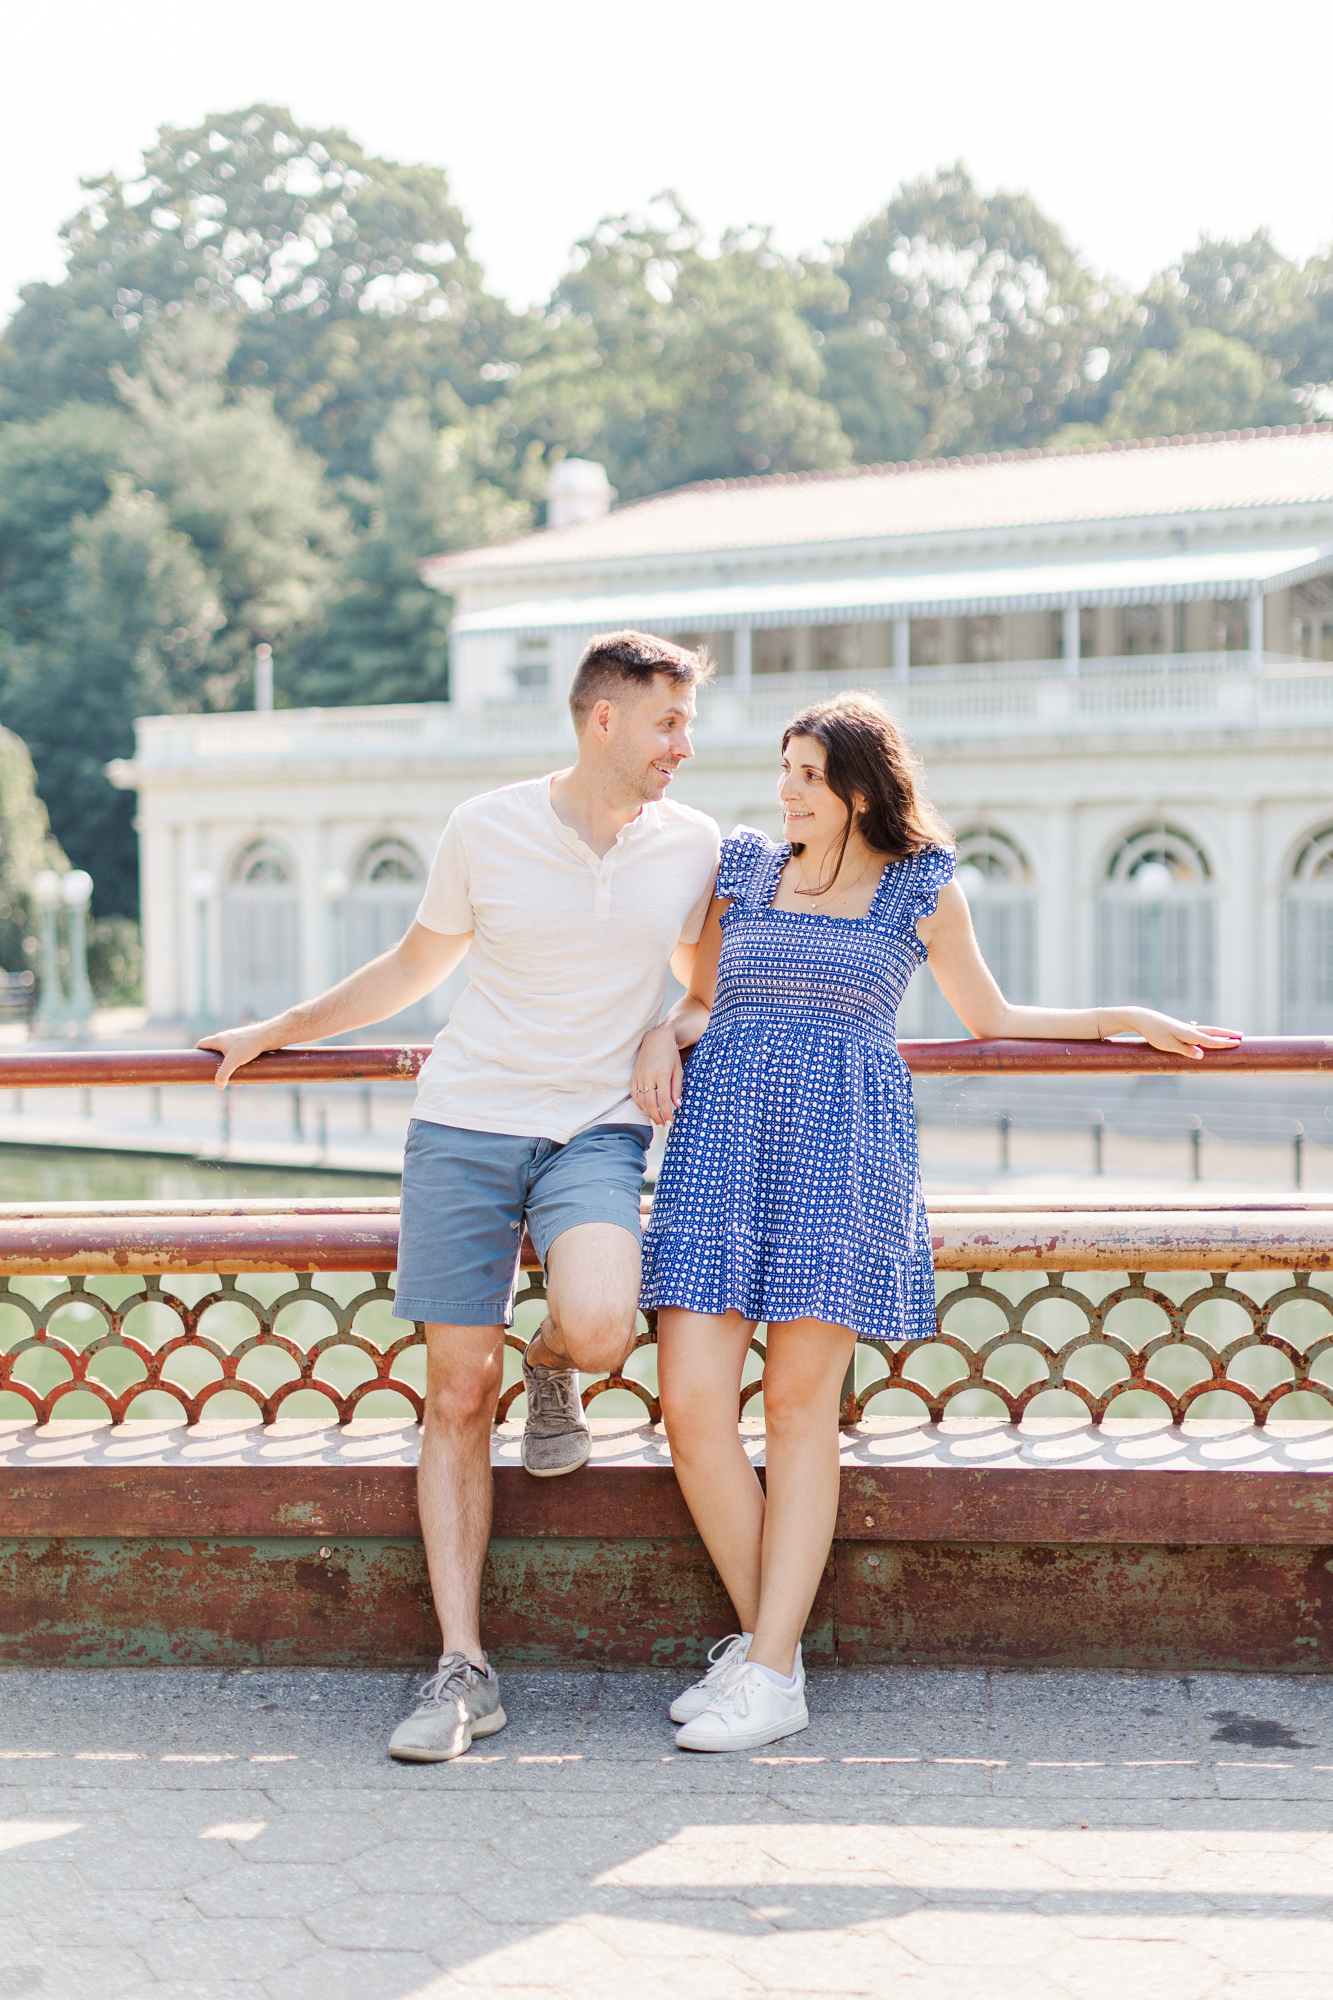 Special engagement session in Prospect Park